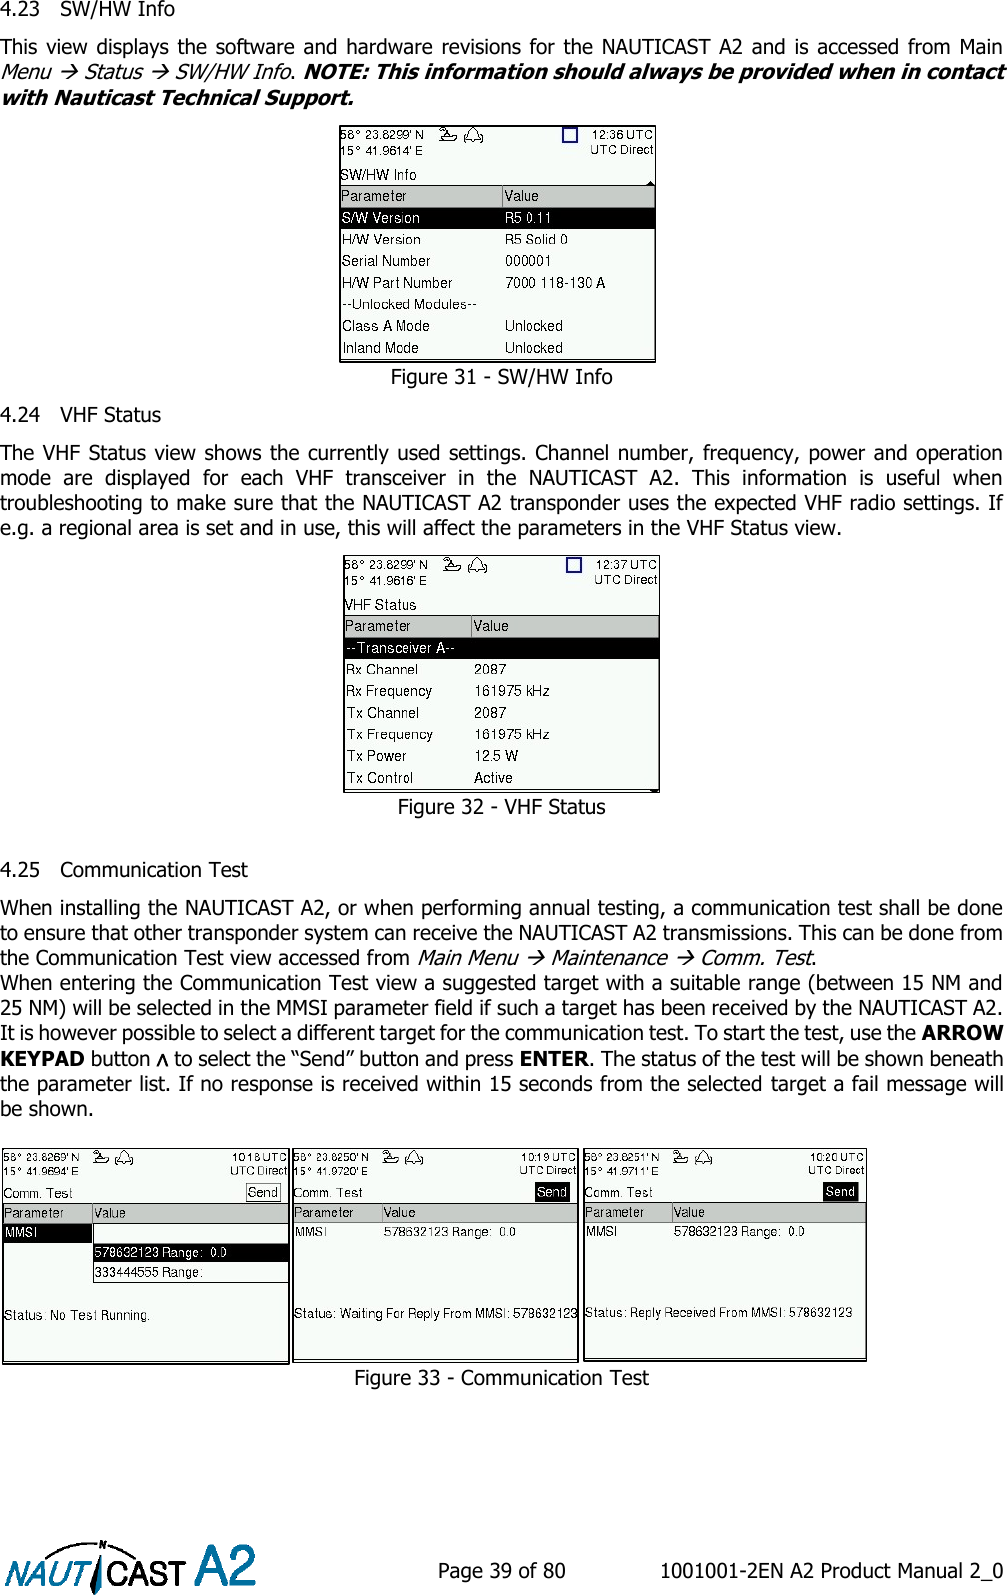    Page 39 of 80  1001001-2EN A2 Product Manual 2_0   4.23 SW/HW Info This view displays the  software and hardware revisions for the NAUTICAST A2 and is accessed from Main Menu  Status  SW/HW Info. NOTE: This information should always be provided when in contact with Nauticast Technical Support. Figure 31 - SW/HW Info 4.24 VHF Status The VHF Status view shows the currently used settings. Channel number, frequency, power and operation mode  are  displayed  for  each  VHF  transceiver  in  the  NAUTICAST  A2.  This  information  is  useful  when troubleshooting to make sure that the NAUTICAST A2 transponder uses the expected VHF radio settings. If e.g. a regional area is set and in use, this will affect the parameters in the VHF Status view. Figure 32 - VHF Status  4.25 Communication Test When installing the NAUTICAST A2, or when performing annual testing, a communication test shall be done to ensure that other transponder system can receive the NAUTICAST A2 transmissions. This can be done from the Communication Test view accessed from Main Menu  Maintenance  Comm. Test. When entering the Communication Test view a suggested target with a suitable range (between 15 NM and 25 NM) will be selected in the MMSI parameter field if such a target has been received by the NAUTICAST A2. It is however possible to select a different target for the communication test. To start the test, use the ARROW KEYPAD button ∧ to select the “Send” button and press ENTER. The status of the test will be shown beneath the parameter list. If no response is received within 15 seconds from the selected target a fail message will be shown.   Figure 33 - Communication Test    